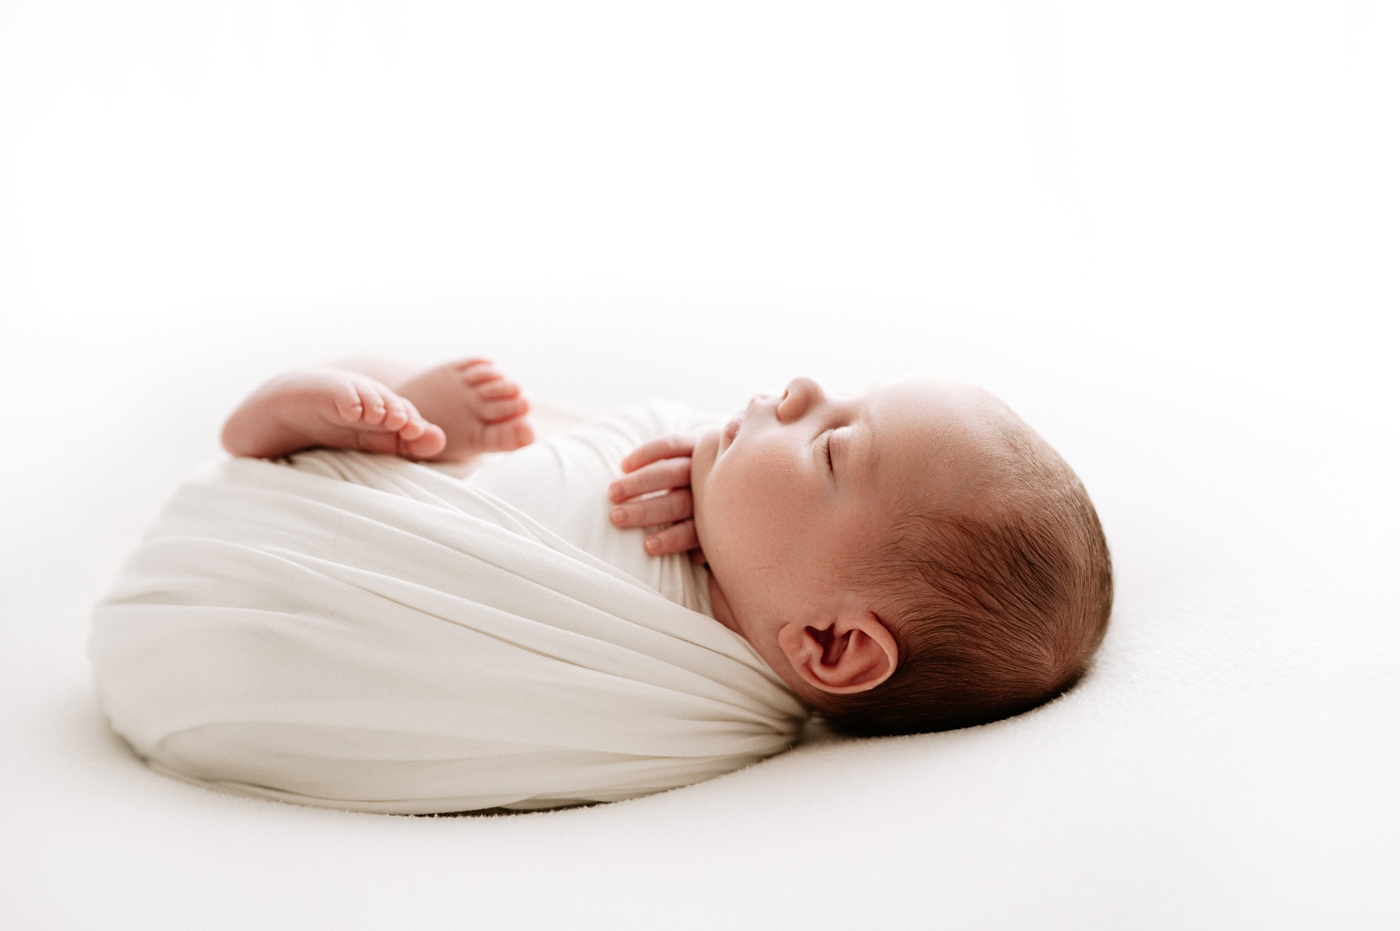 Swaddled baby in posed newborn studio session. Photo by Meg Newton Photography.